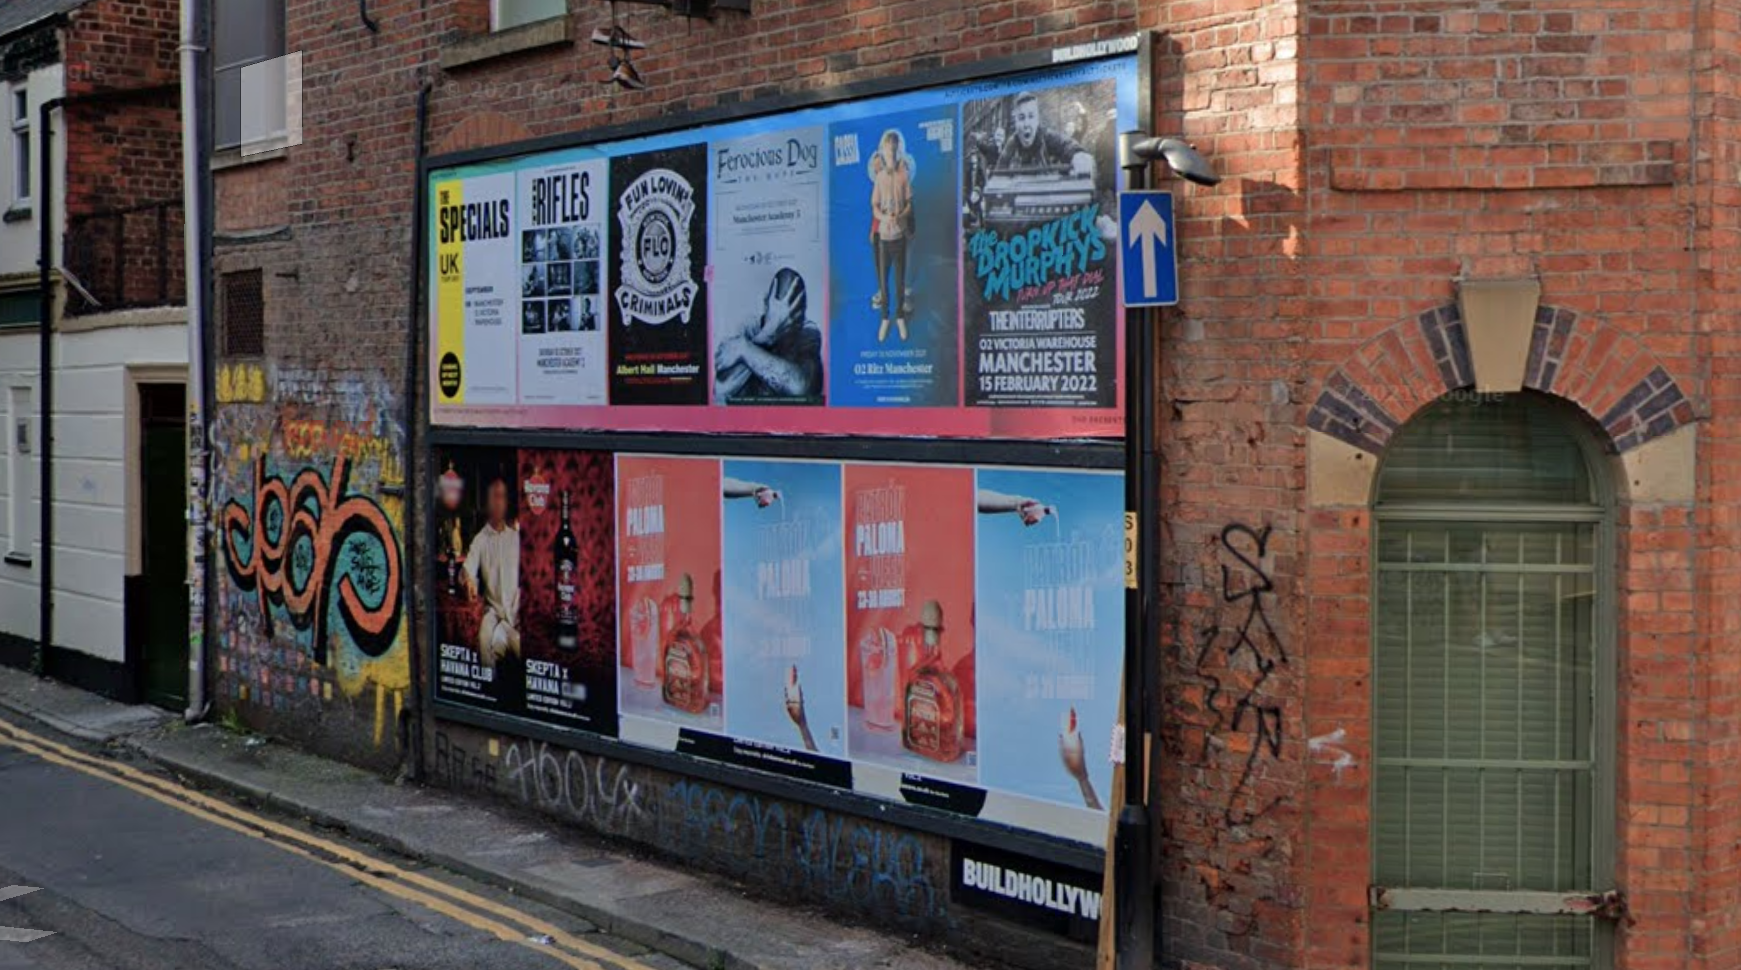 A billboard site on a red brick building with a street sign reading Carpenters Lane